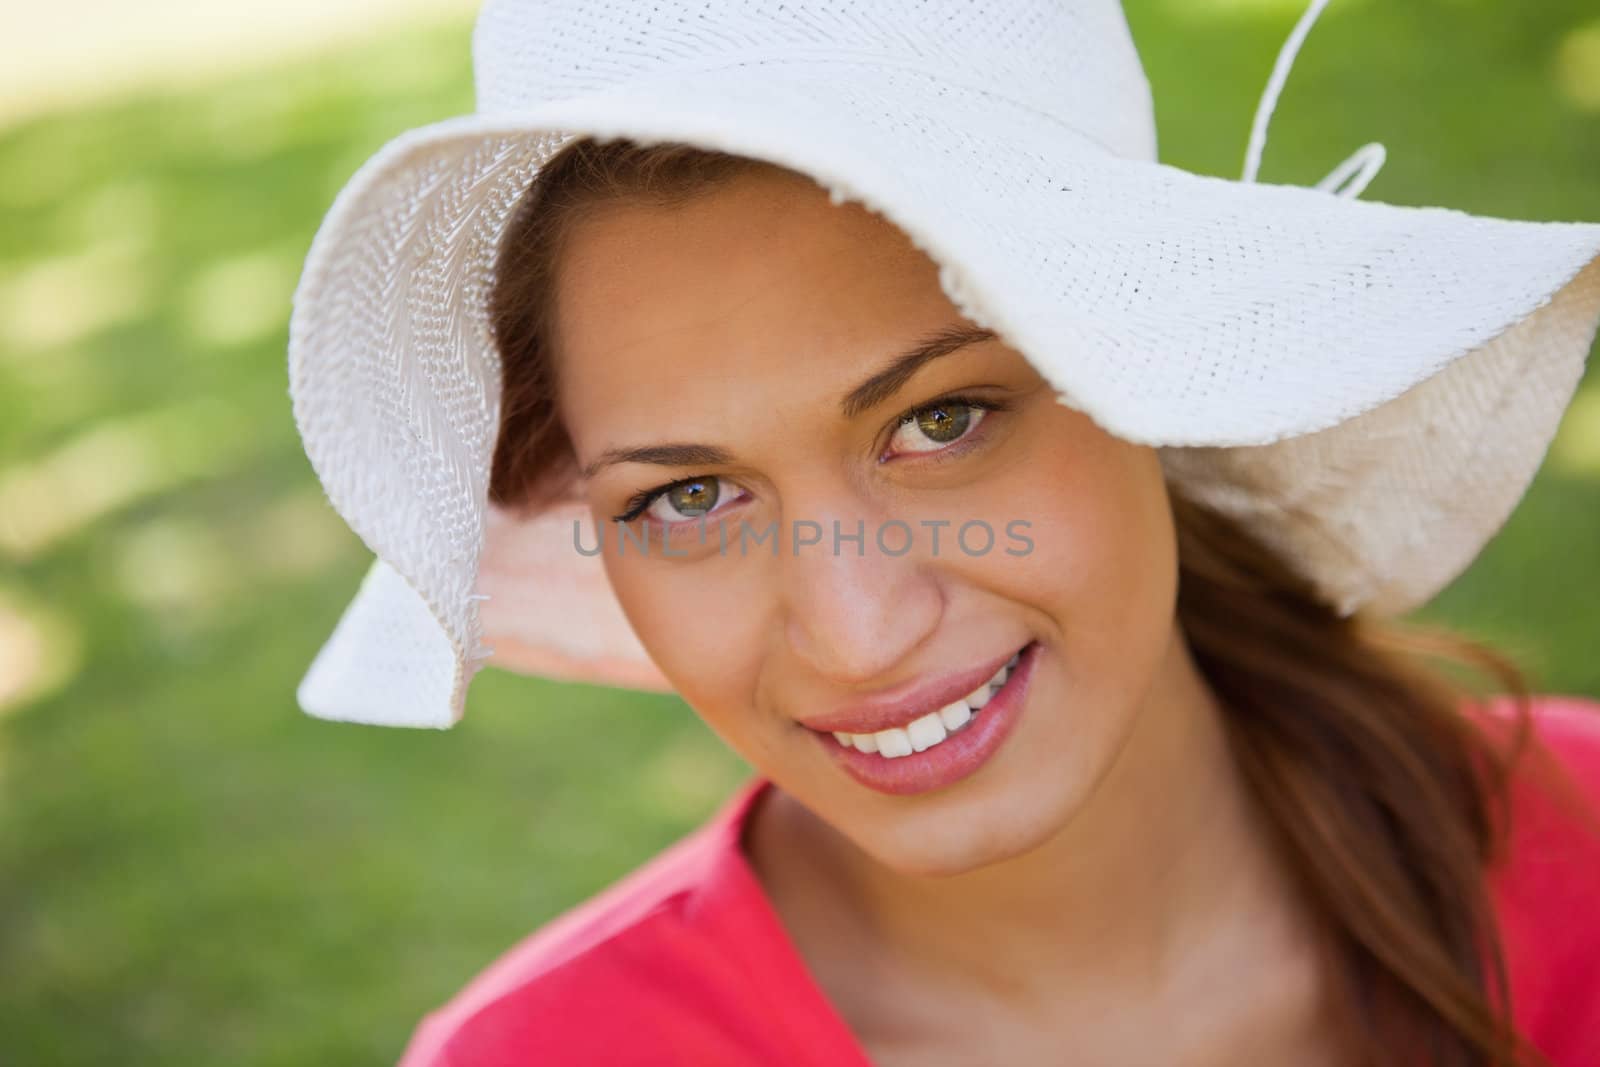 Woman looking ahead while smiling and wearing a white hat